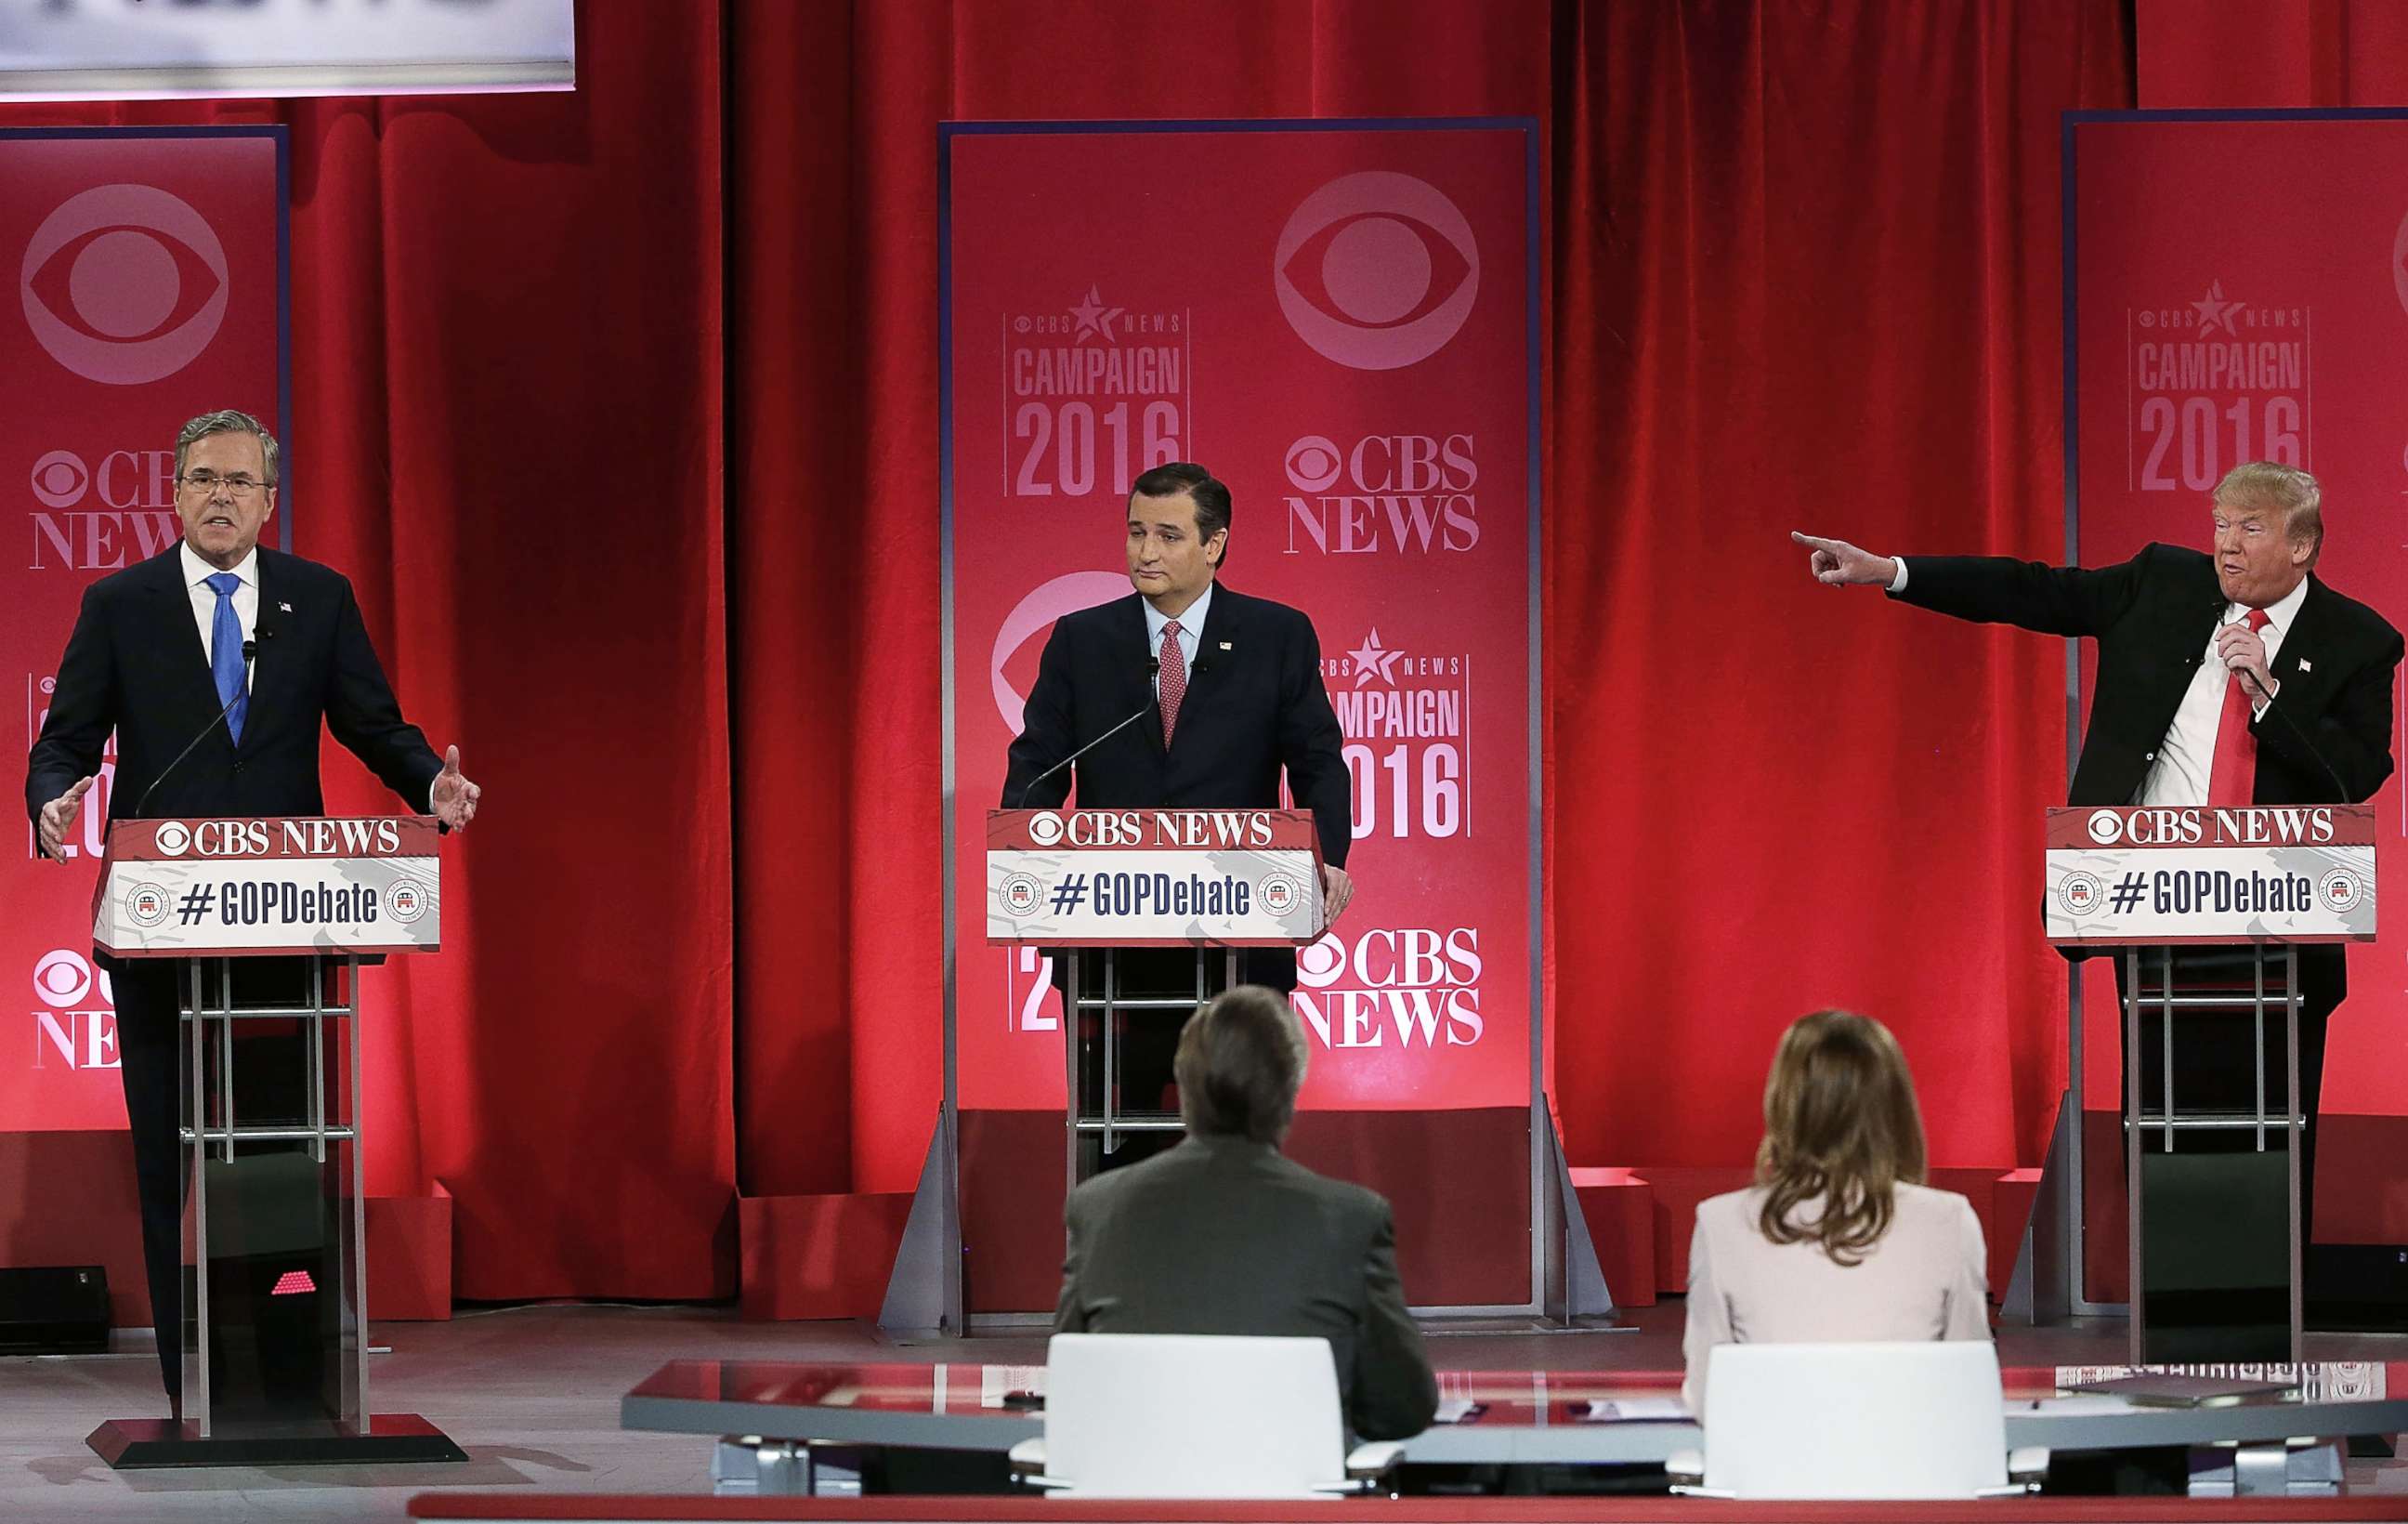 PHOTO: From left, Republican presidential candidates Jeb Bush, Sen. Ted Cruz and Donald Trump participate in debate, Feb. 13, 2016 at the Peace Center in Greenville, S.C.